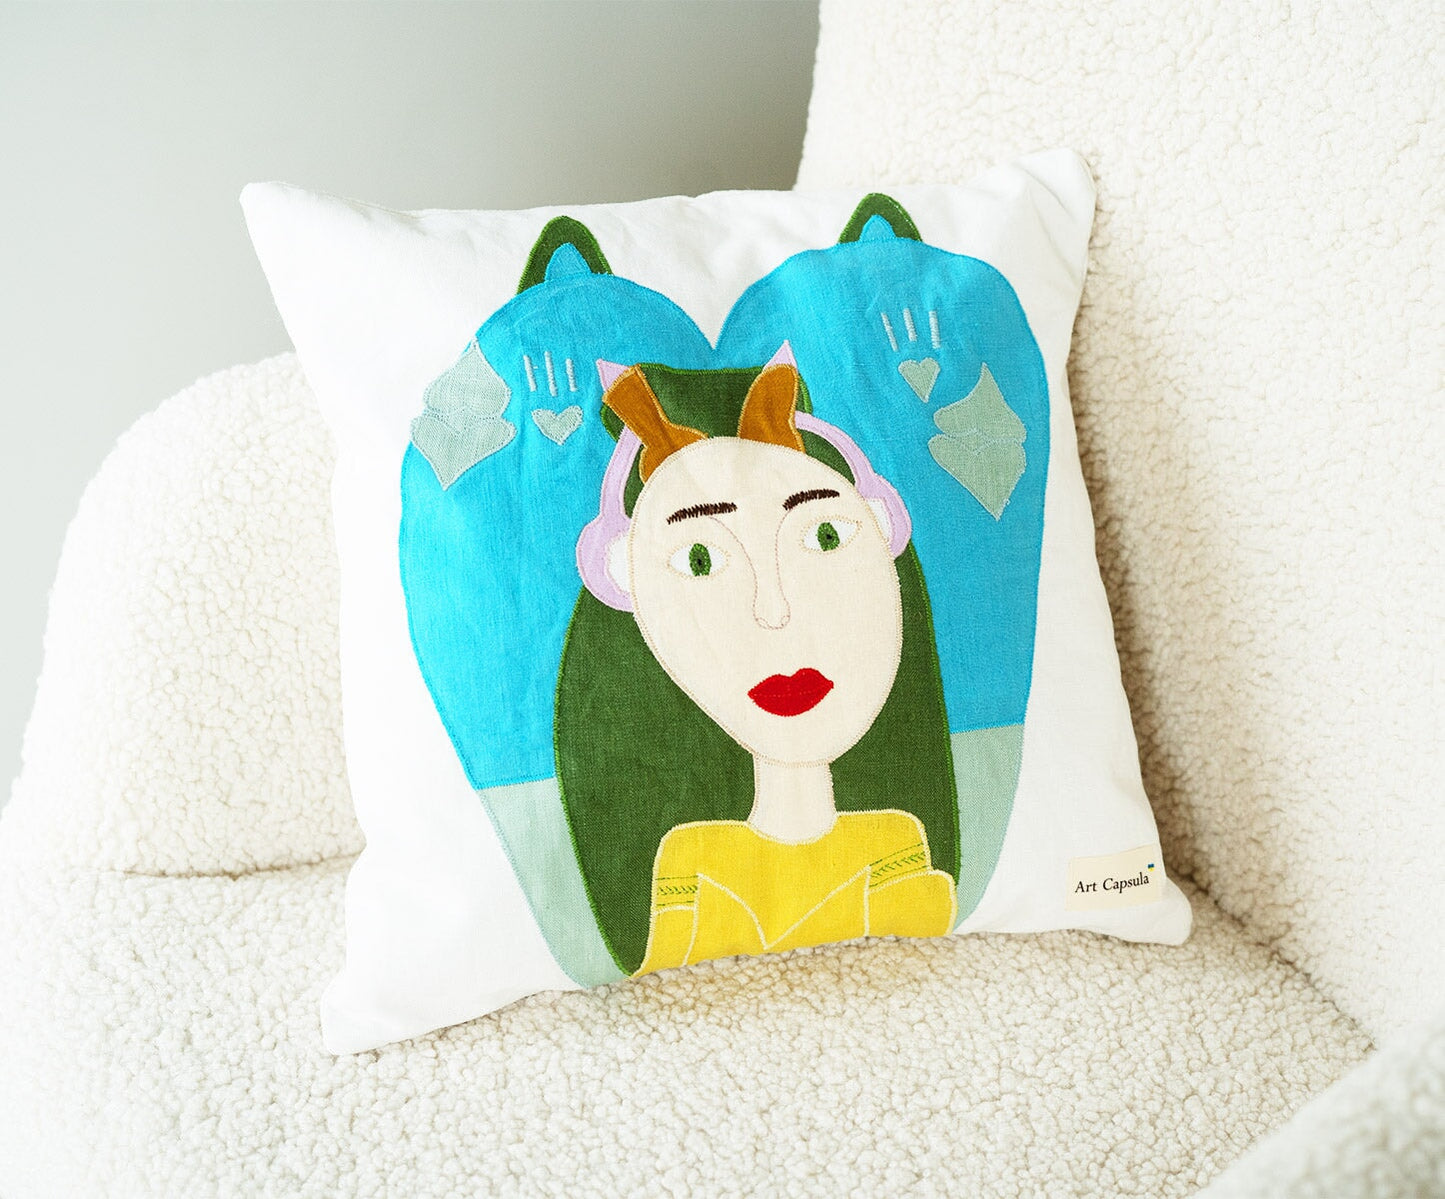 Personalized Handmade Patchwork Pillow: Transforming your child's drawing into a cozy work of art!